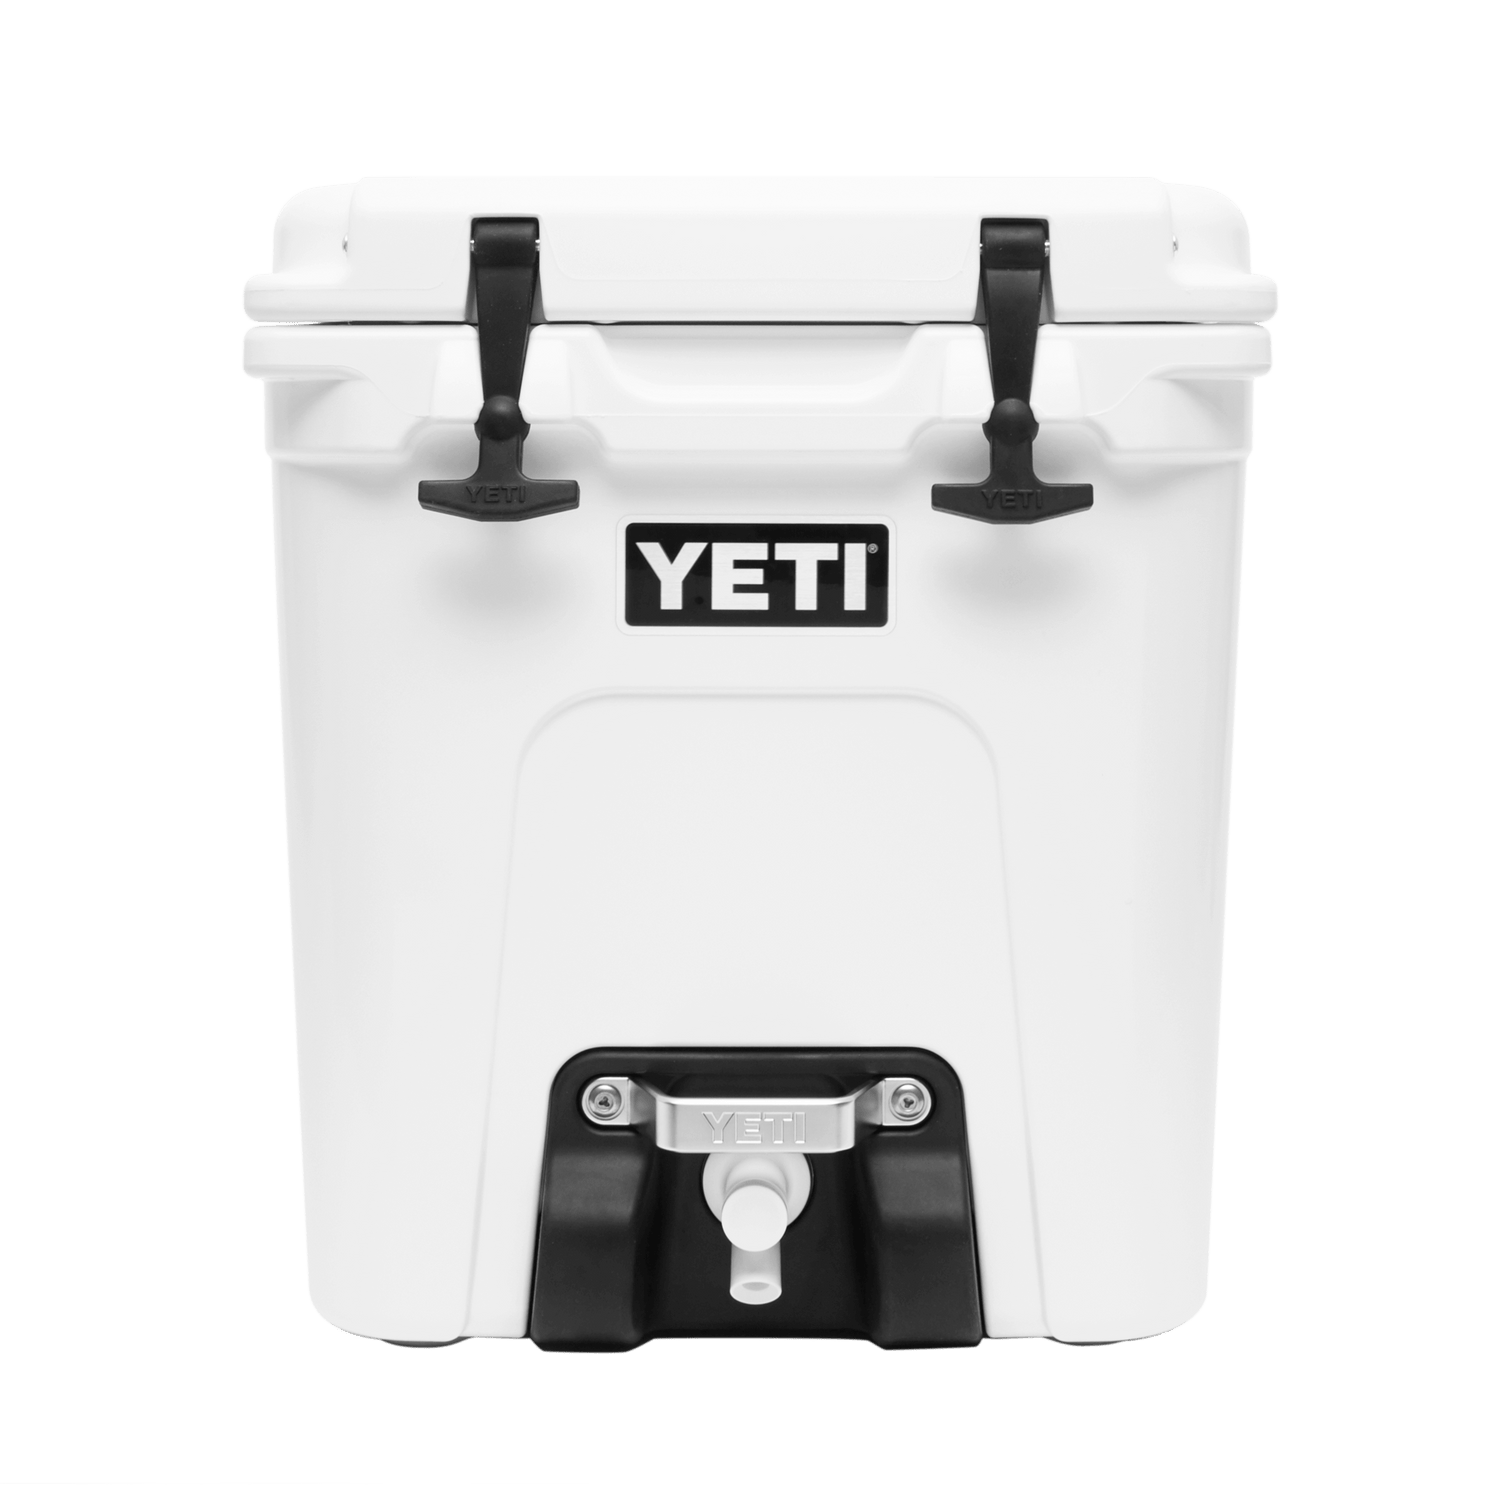 5 YETI Gadgets That Will Transform Your Cooler 